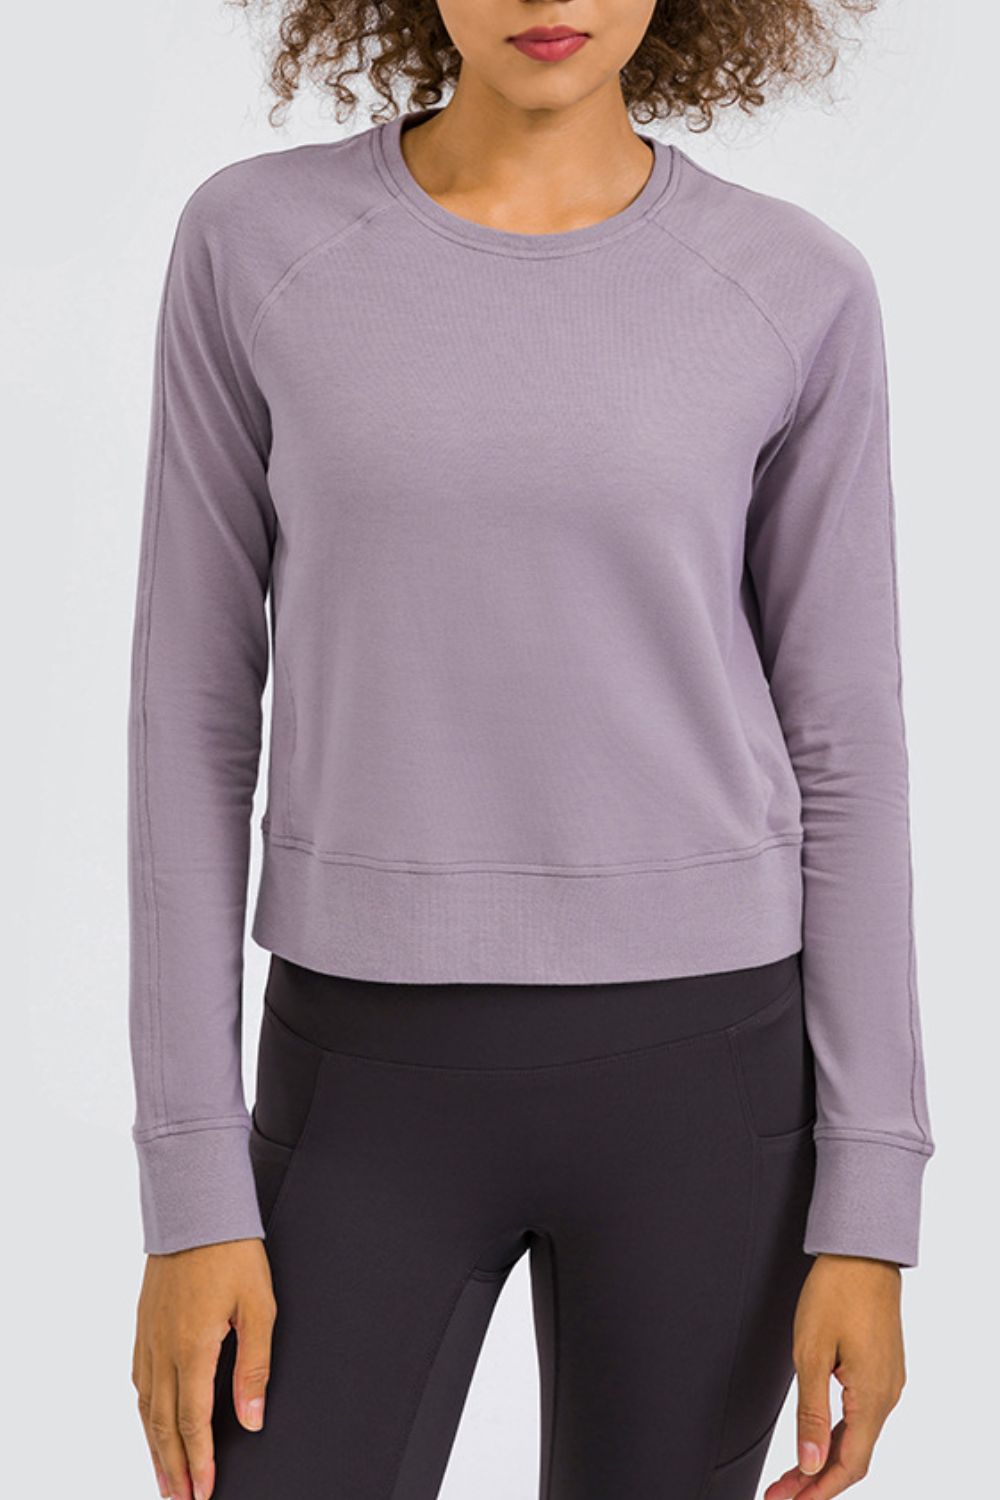 Rosy Brown Cozy and Fabulous Raglan Sleeve Sports Top Sentient Beauty Fashions Apparel & Accessories